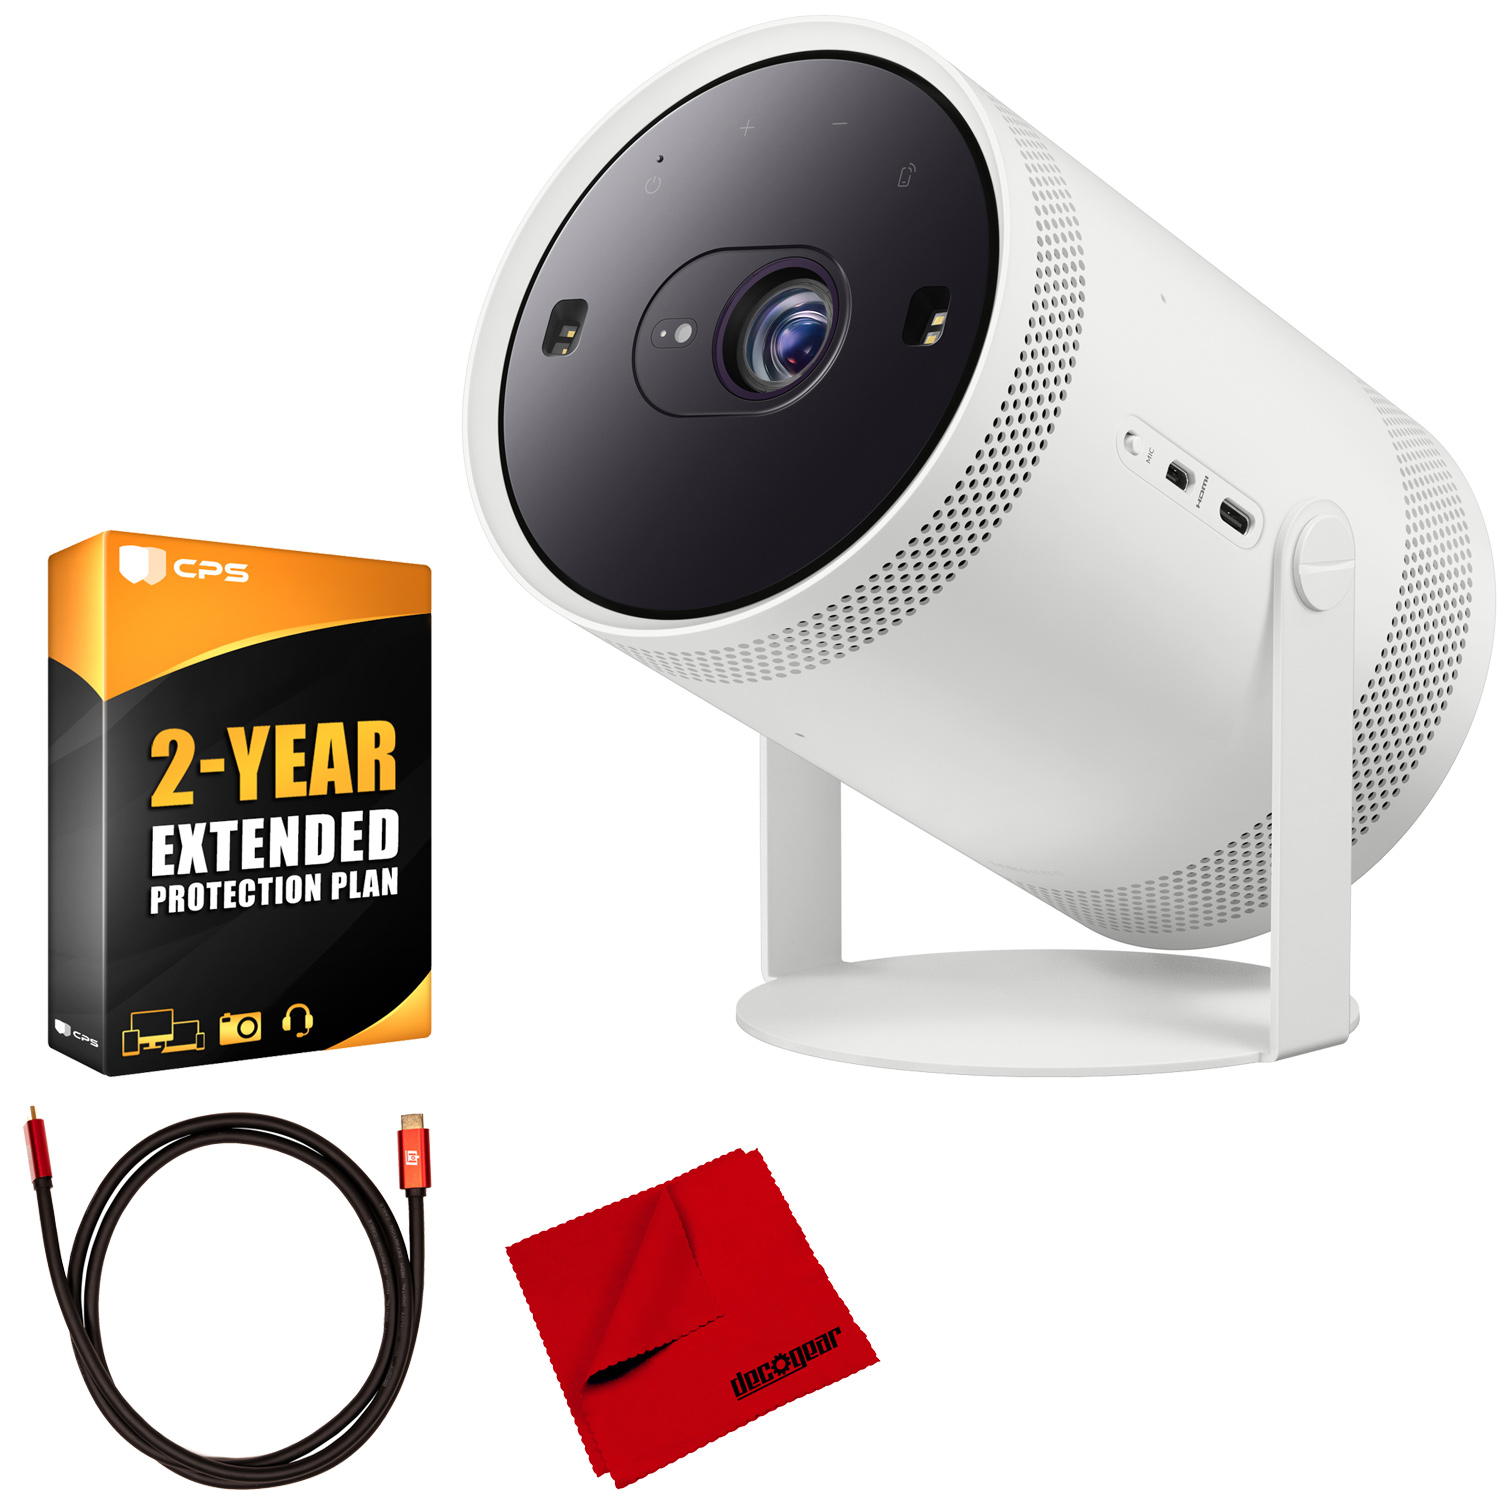 Samsung The Freestyle Projector (SP-LSP3BLAXZA) Bundle with 2-Year Warranty and HDMI - image 1 of 10